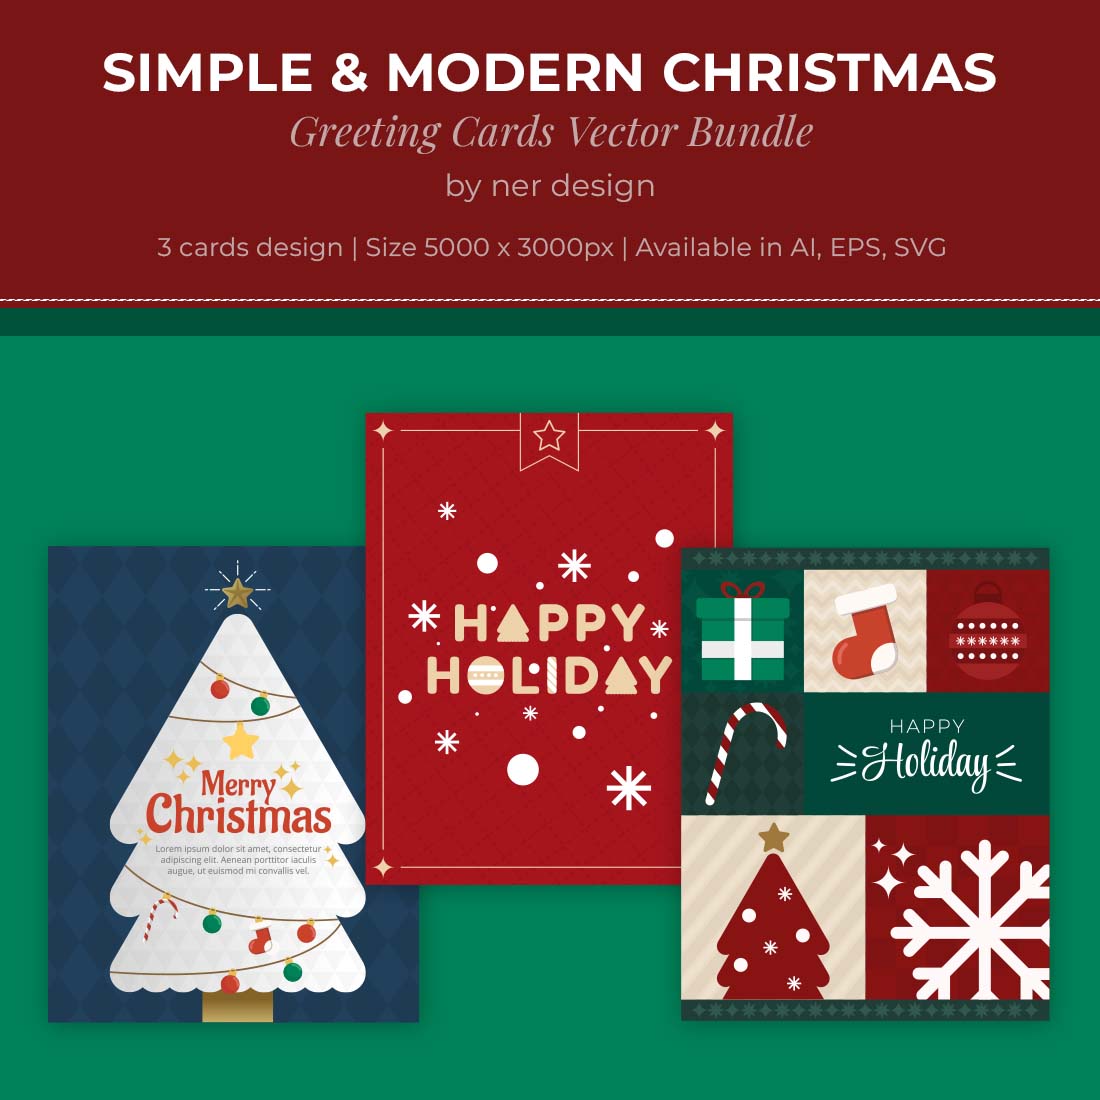 Simple Modern Christmas Greeting Cards Vector Design cover image.